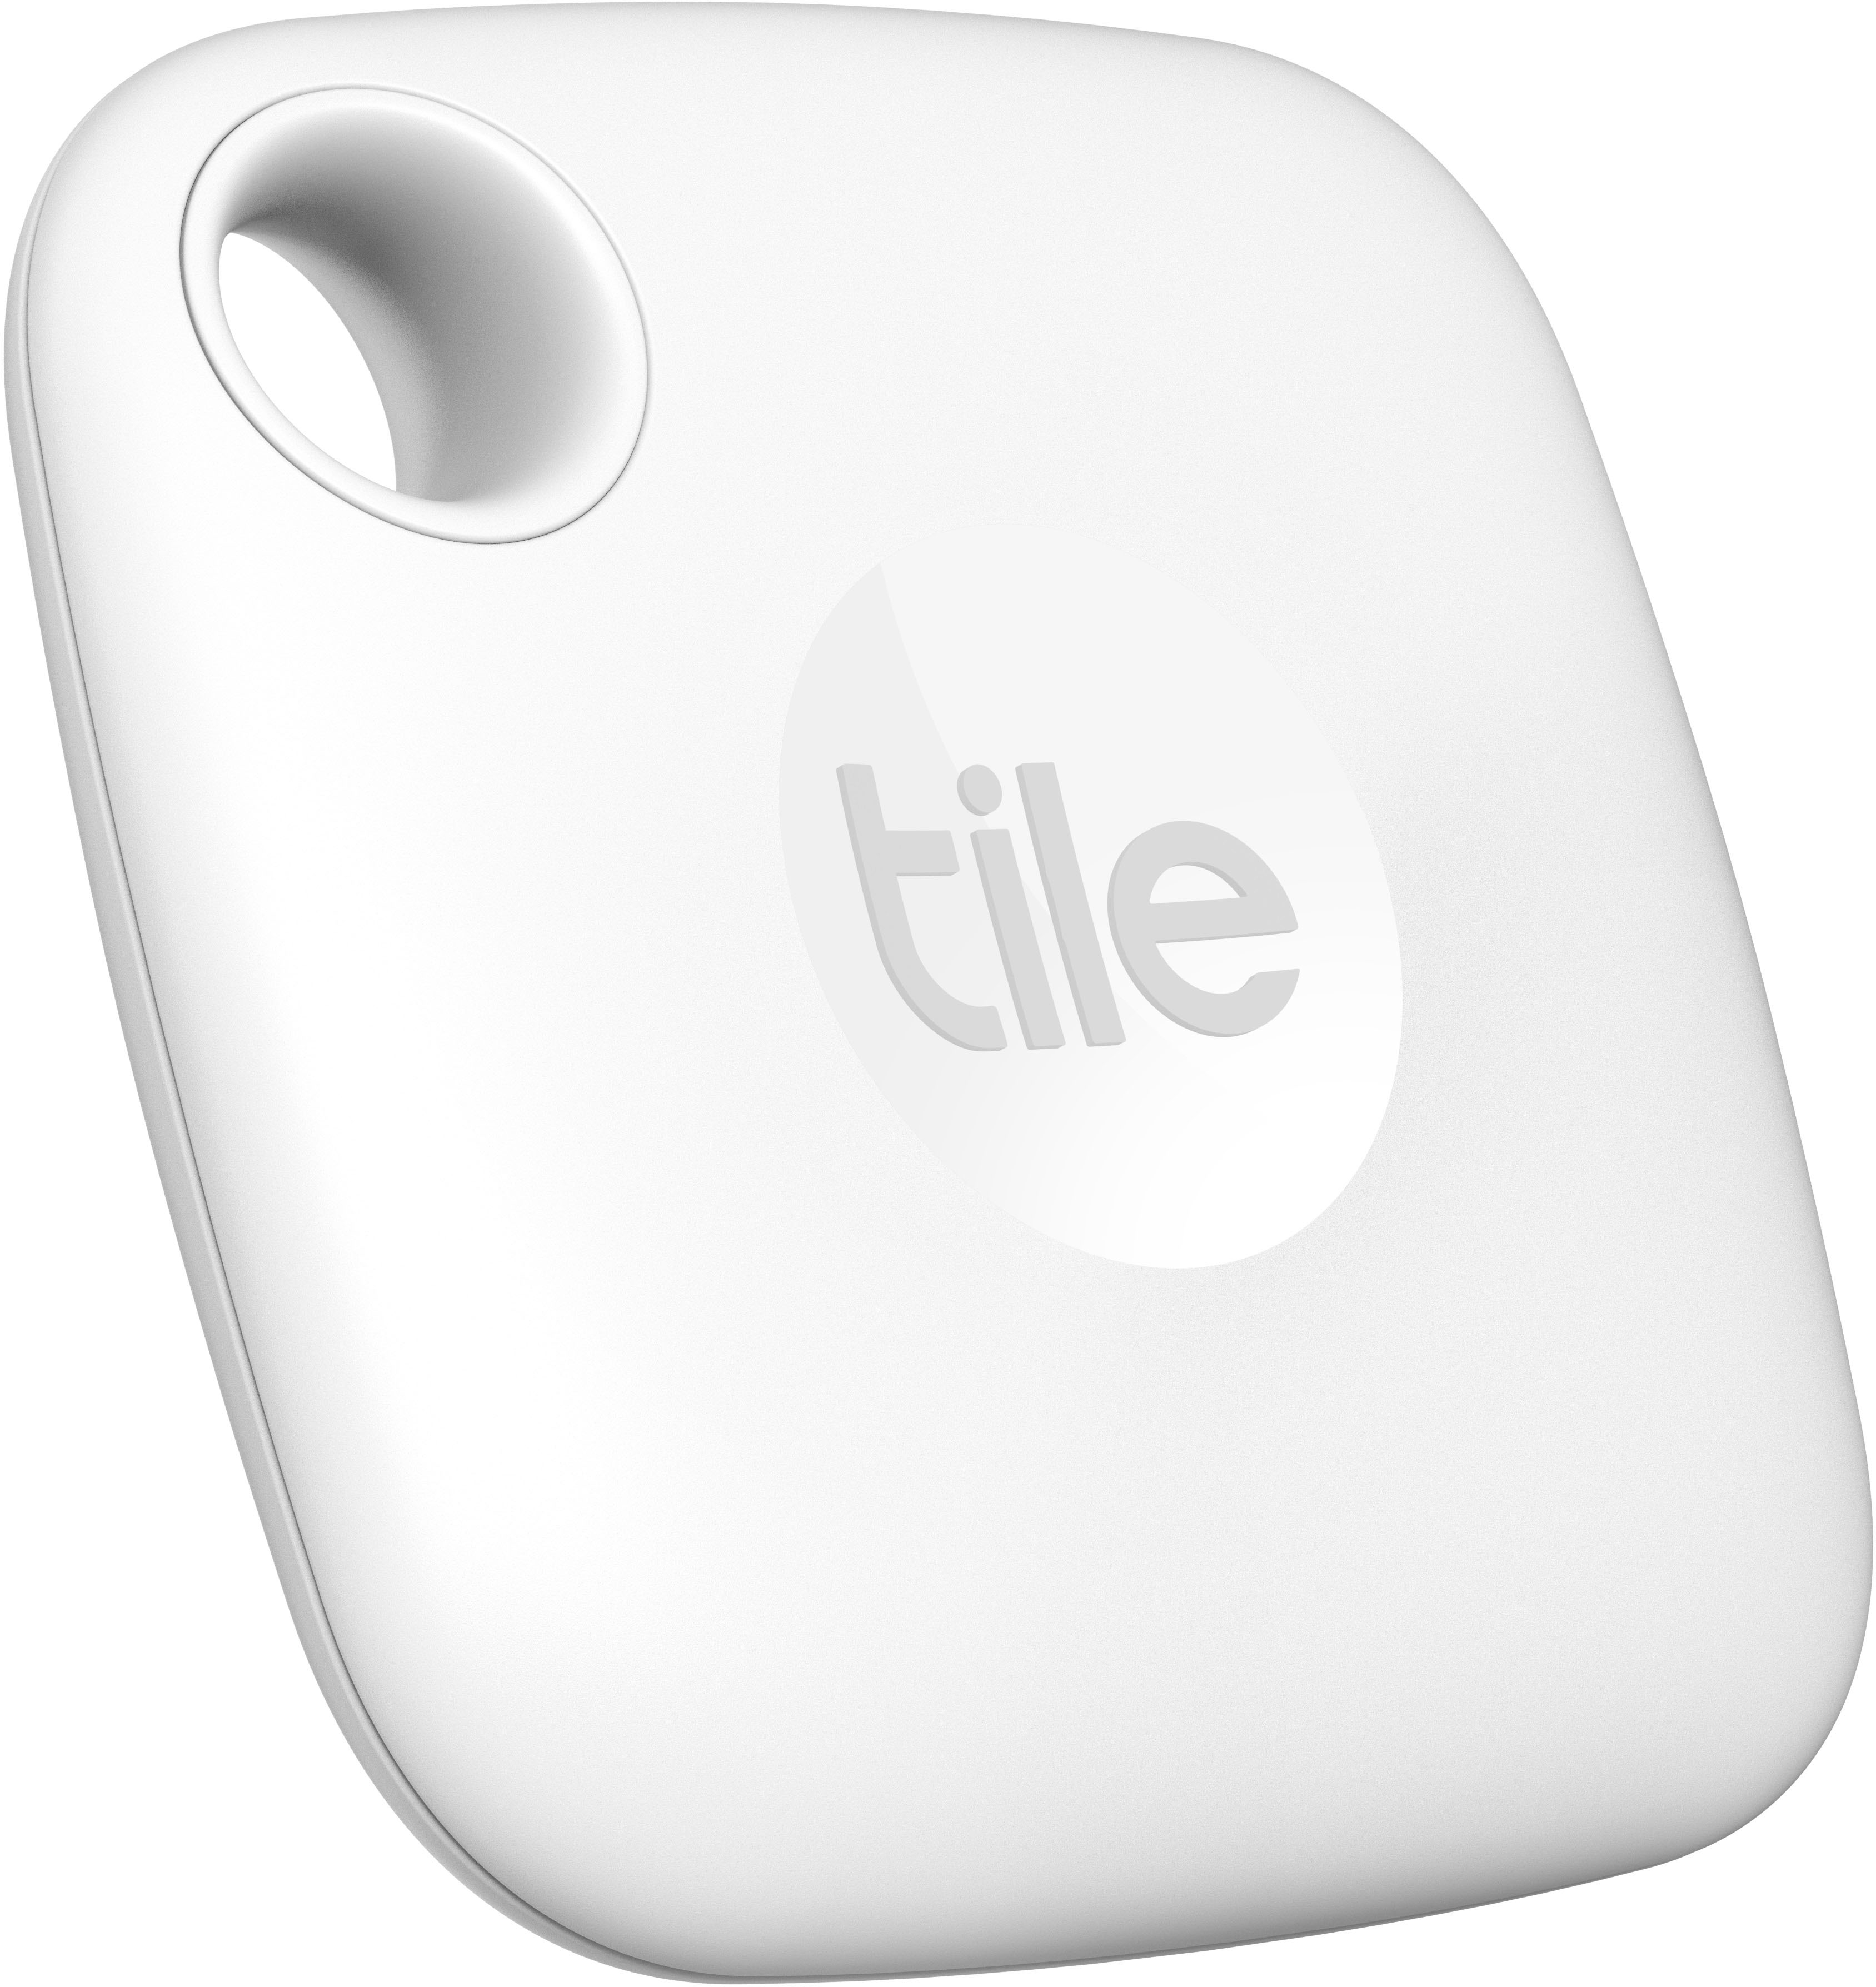 tile Pro (2020) - 1 Pack Bluetooth Tracker RE-21001 - The Home Depot